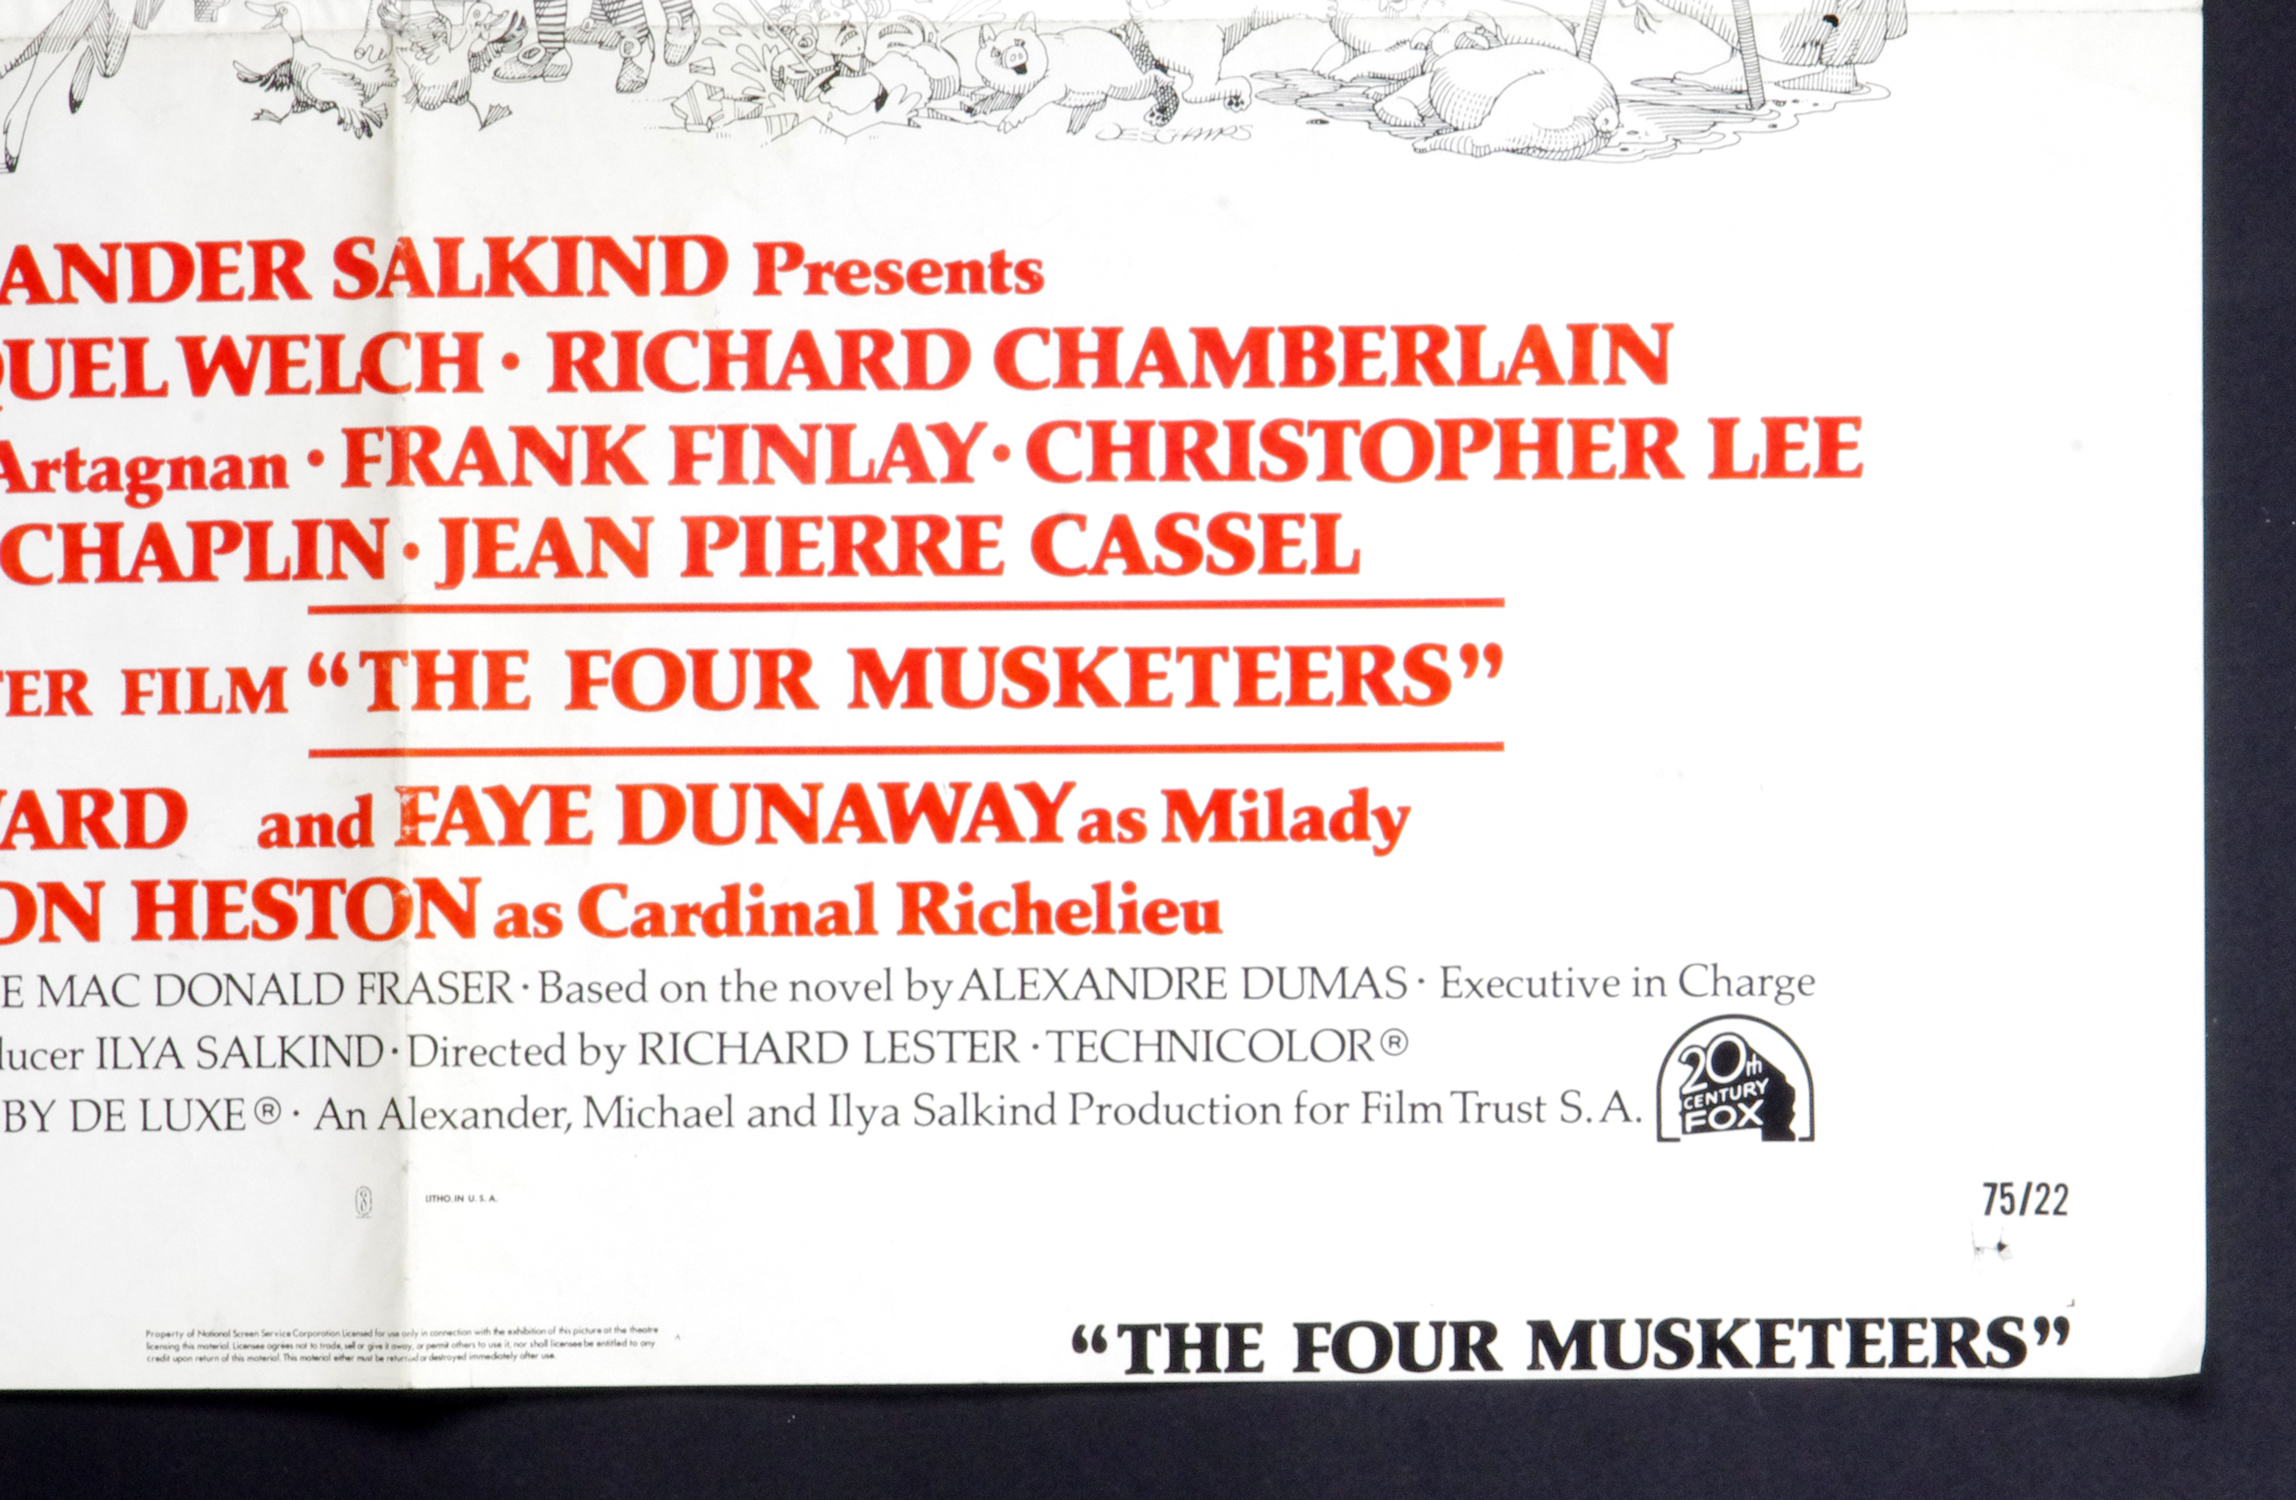 The Four Musketeers Poster Movie Original Vintage 1974 Michael York Raquel Welch